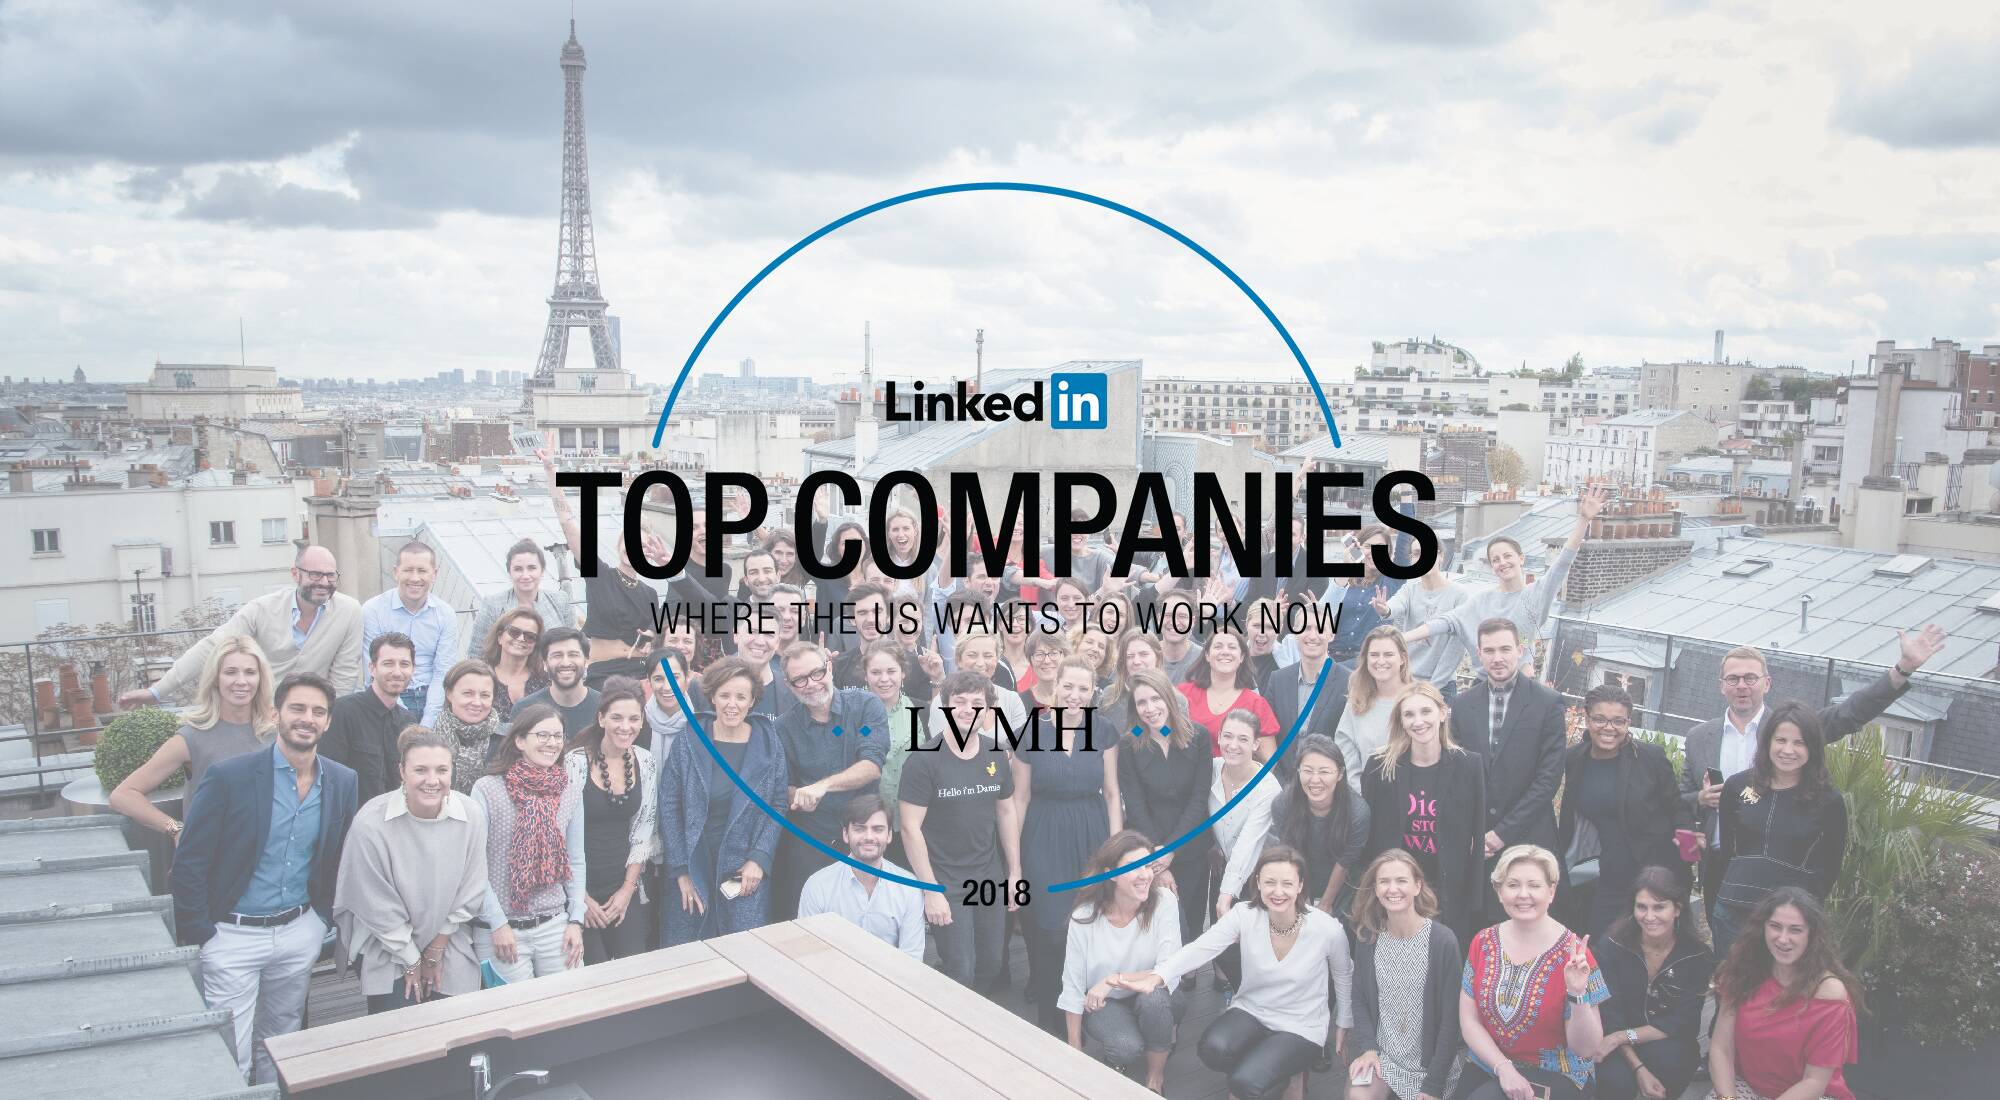 LVMH most attractive employer in France in LinkedIn Top Companies 2018  ranking